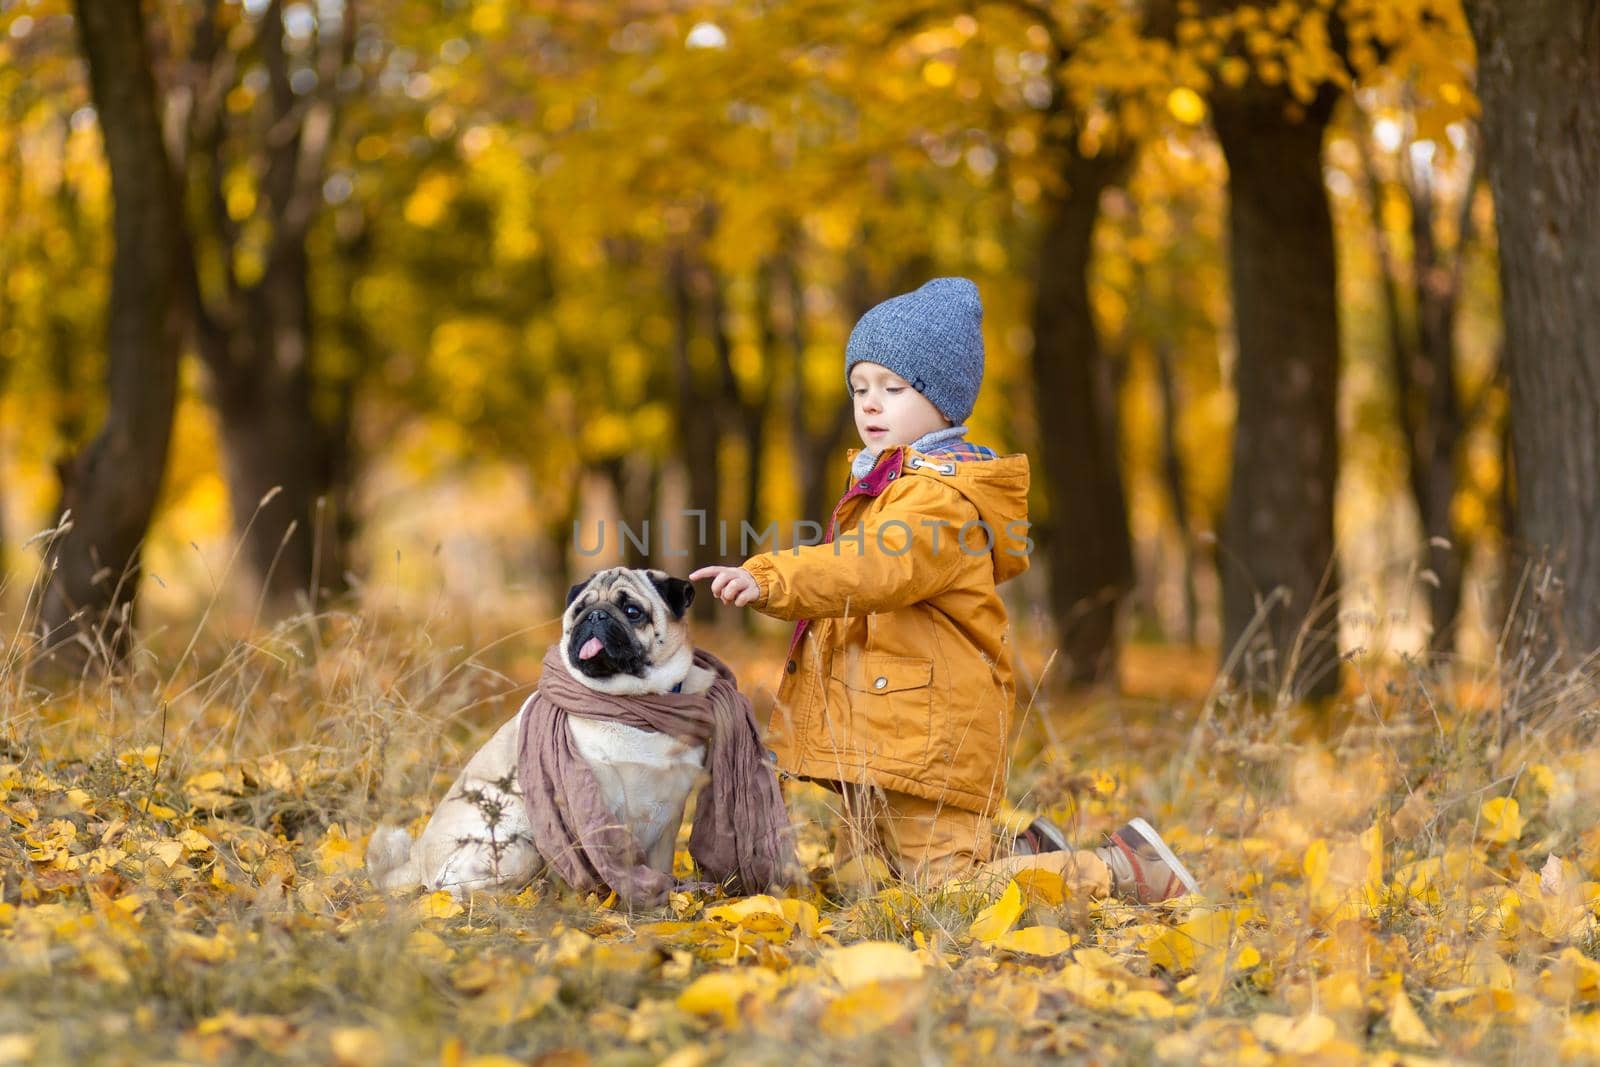 A child sit in fallen yellow leaves with a pug in the autumn park. Friends since childhood by Try_my_best